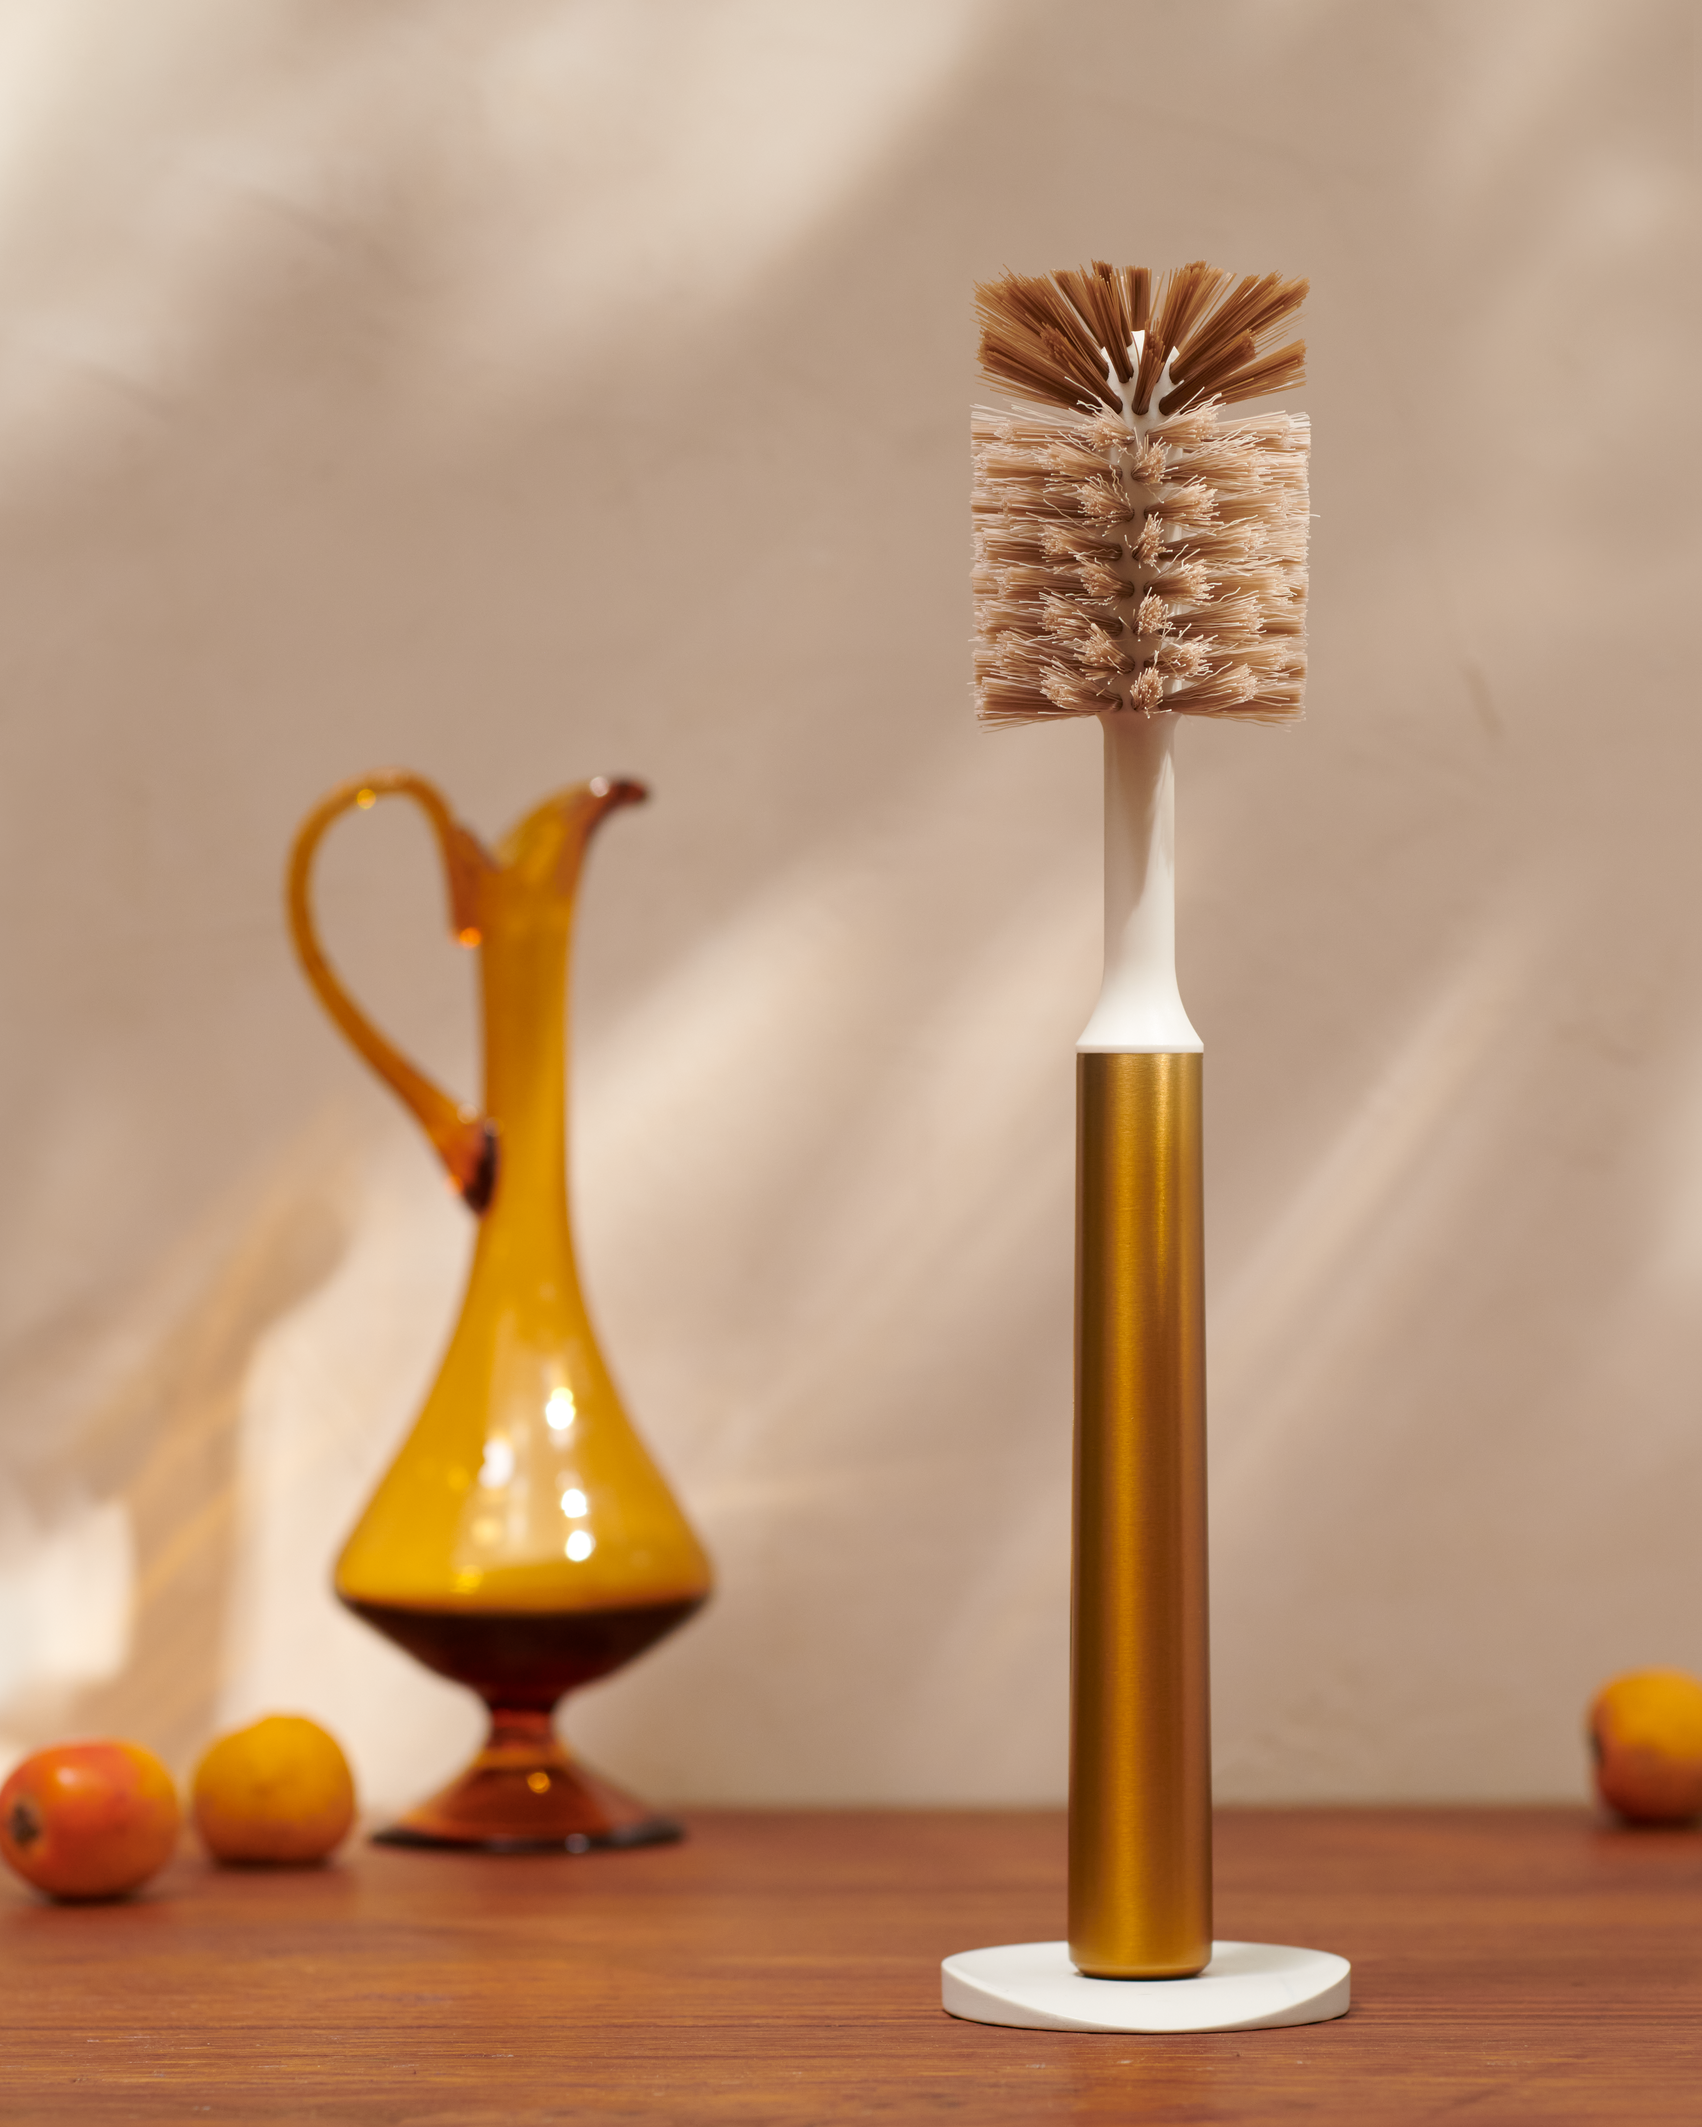 Curio Homegoods Brass Ionic Bottle Brush with vase and fruits in the background